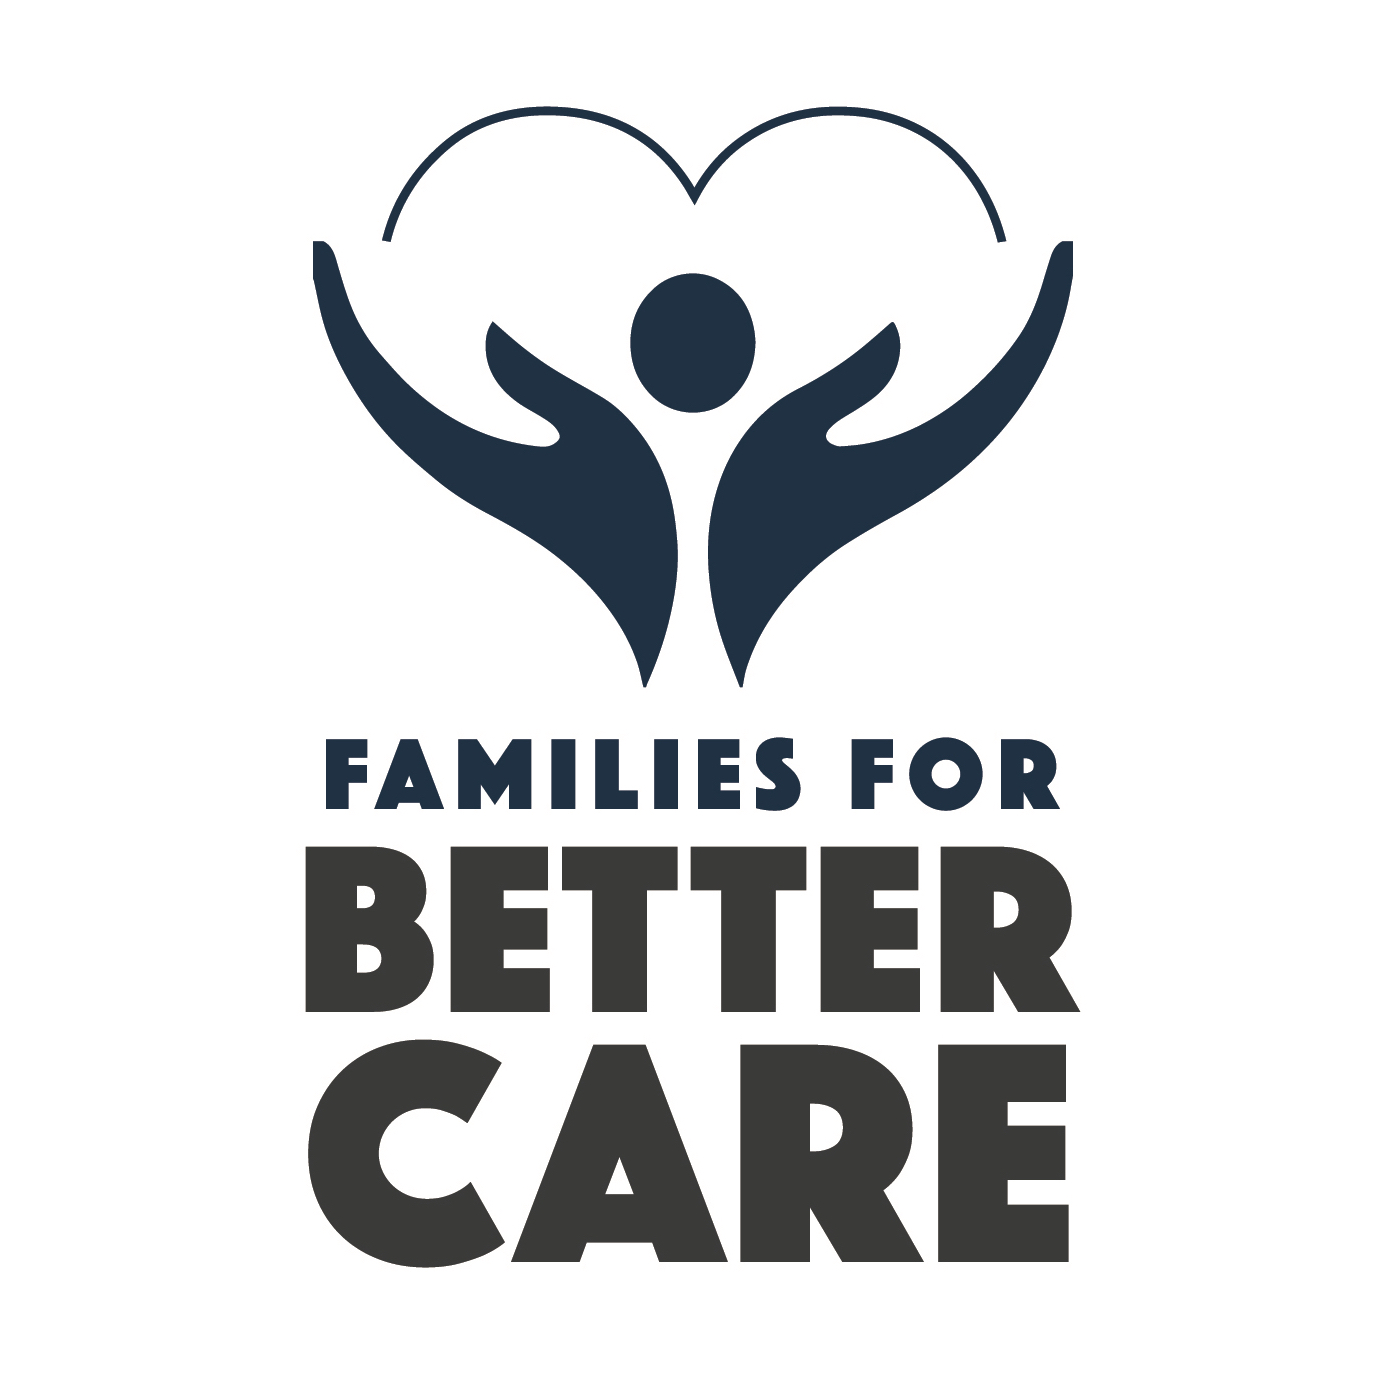 Families for Better Care Brian Lee Texas nursing homes Nursing Home Fines Image